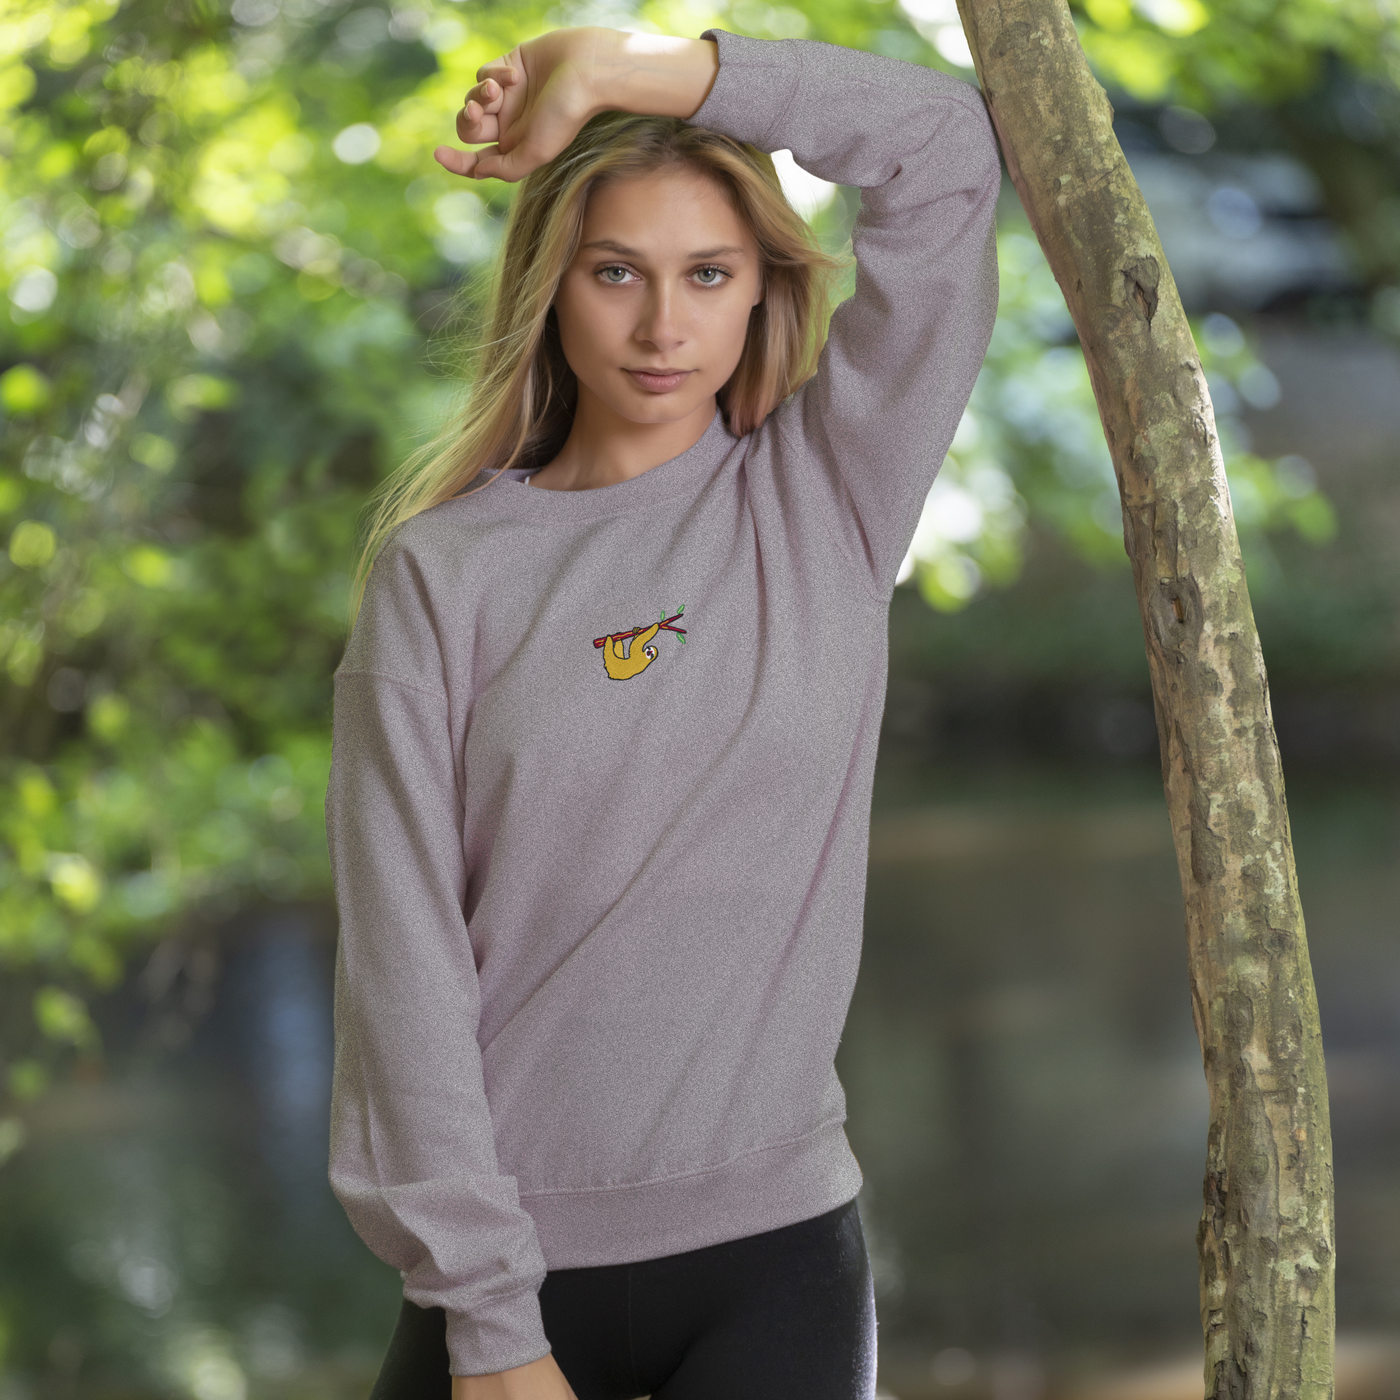 Bobby's Planet Women's Embroidered Sloth Sweatshirt from South American Amazon Animals Collection in Sport Grey Color#color_sport-grey